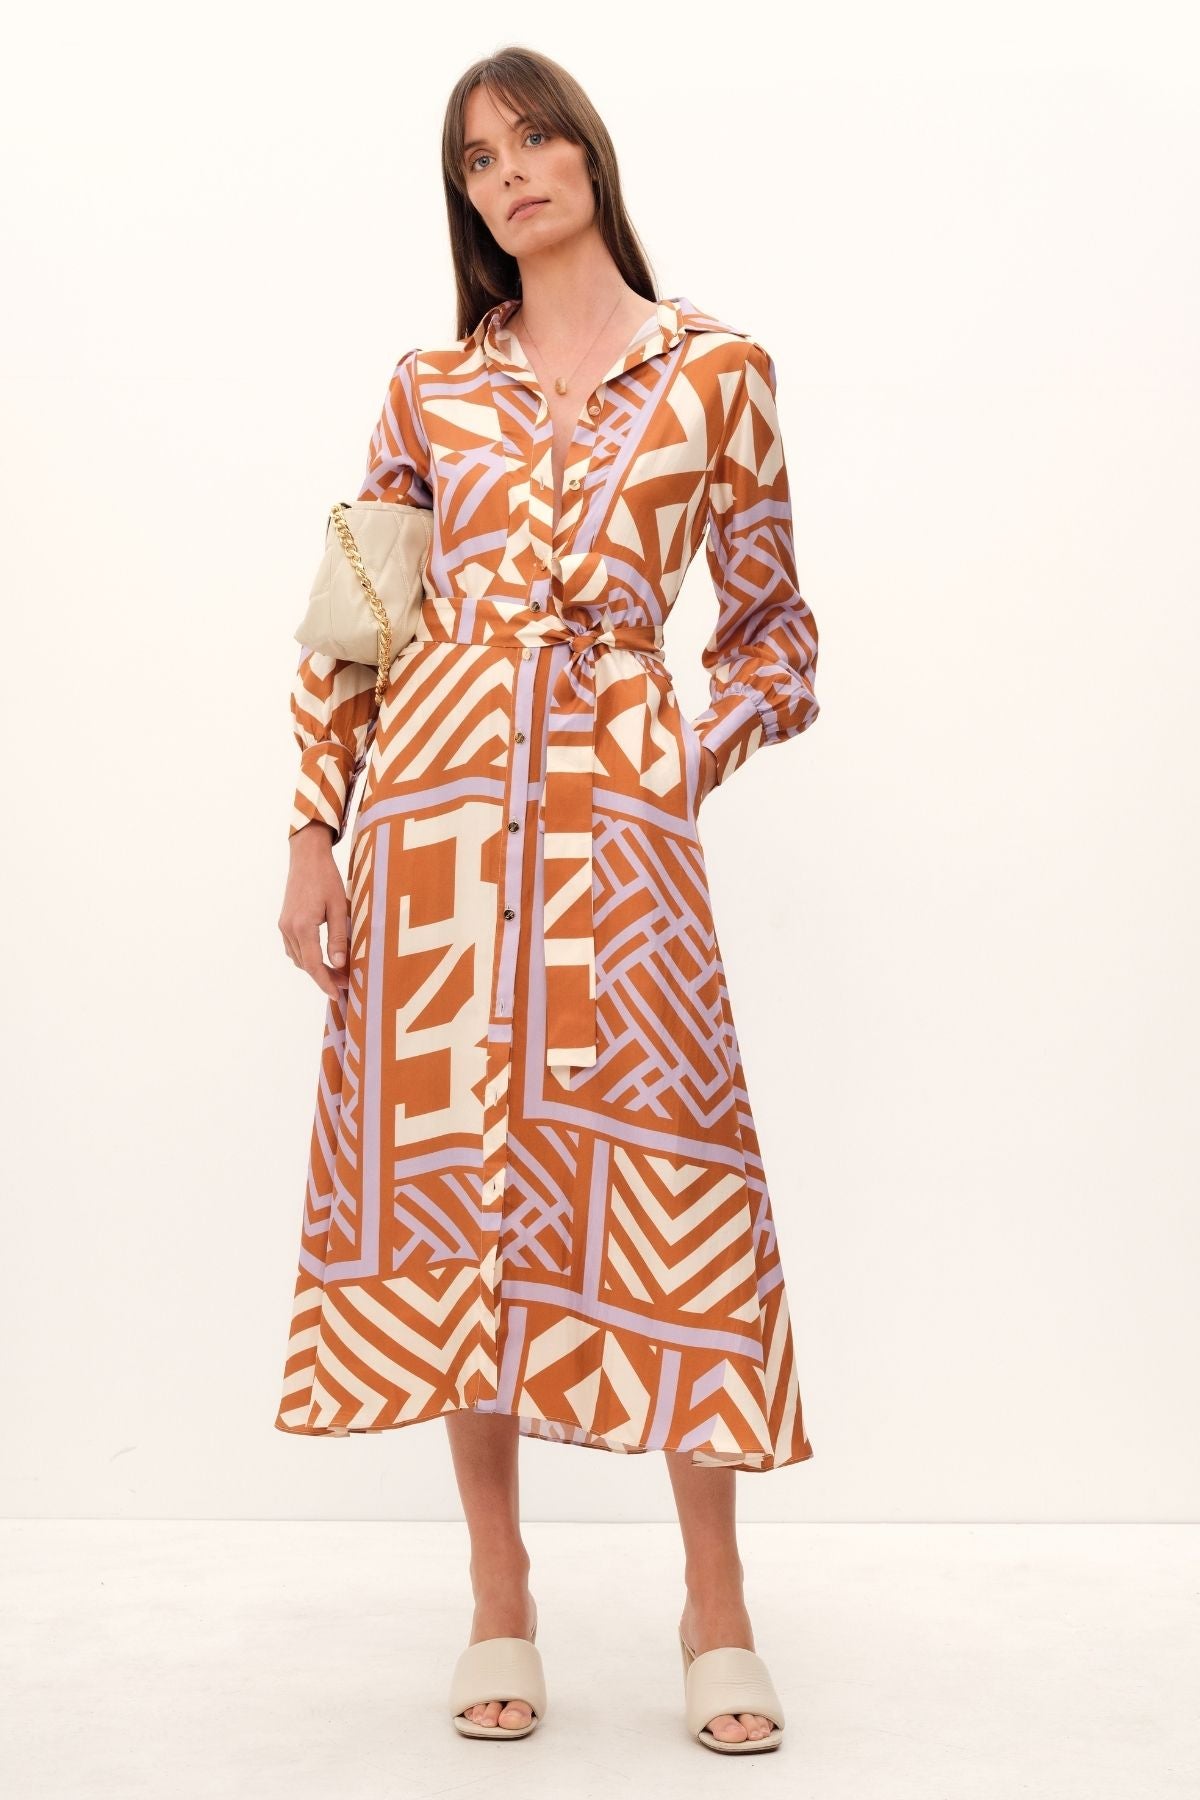 GINGER & SMARTS's House of Mirrors Shirt Dress is crafted from luxe silk twill and featuring a bold geometric print in crème, lilac, and tan, this classic dress is designed with front panel detailing, full length sleeves, and an optional waist tie.